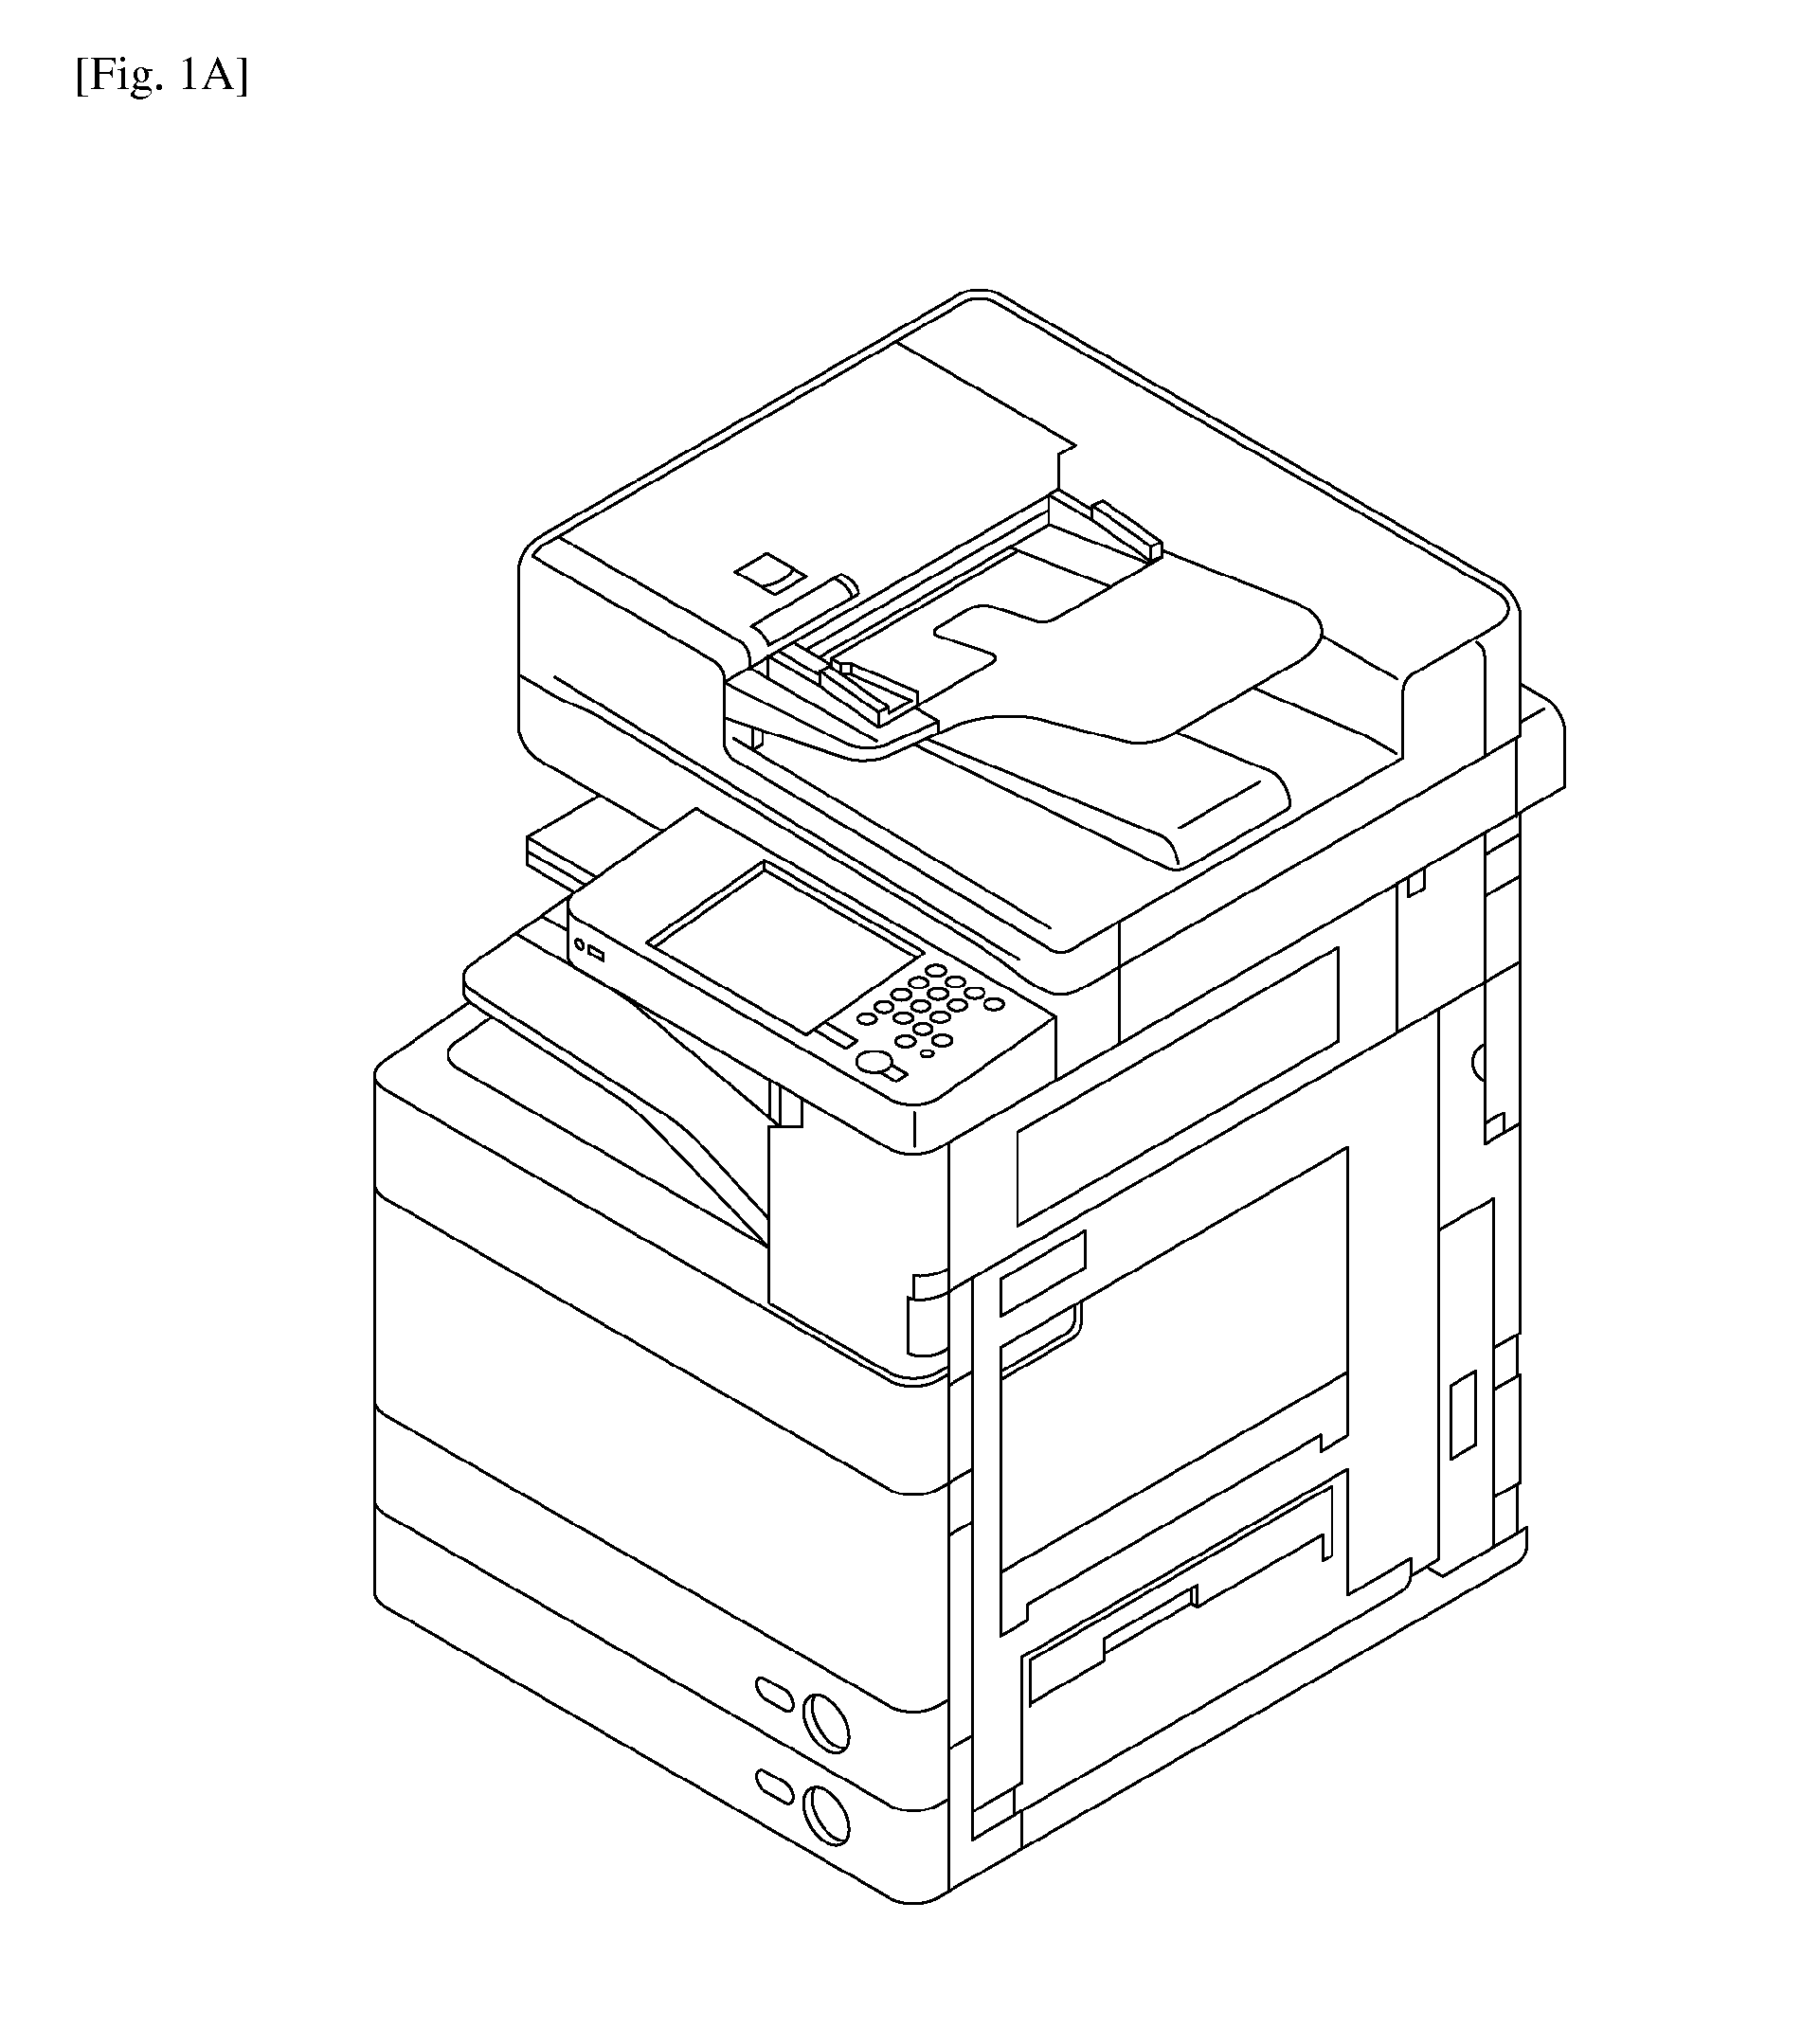 Novel compound and resin composition containing the same